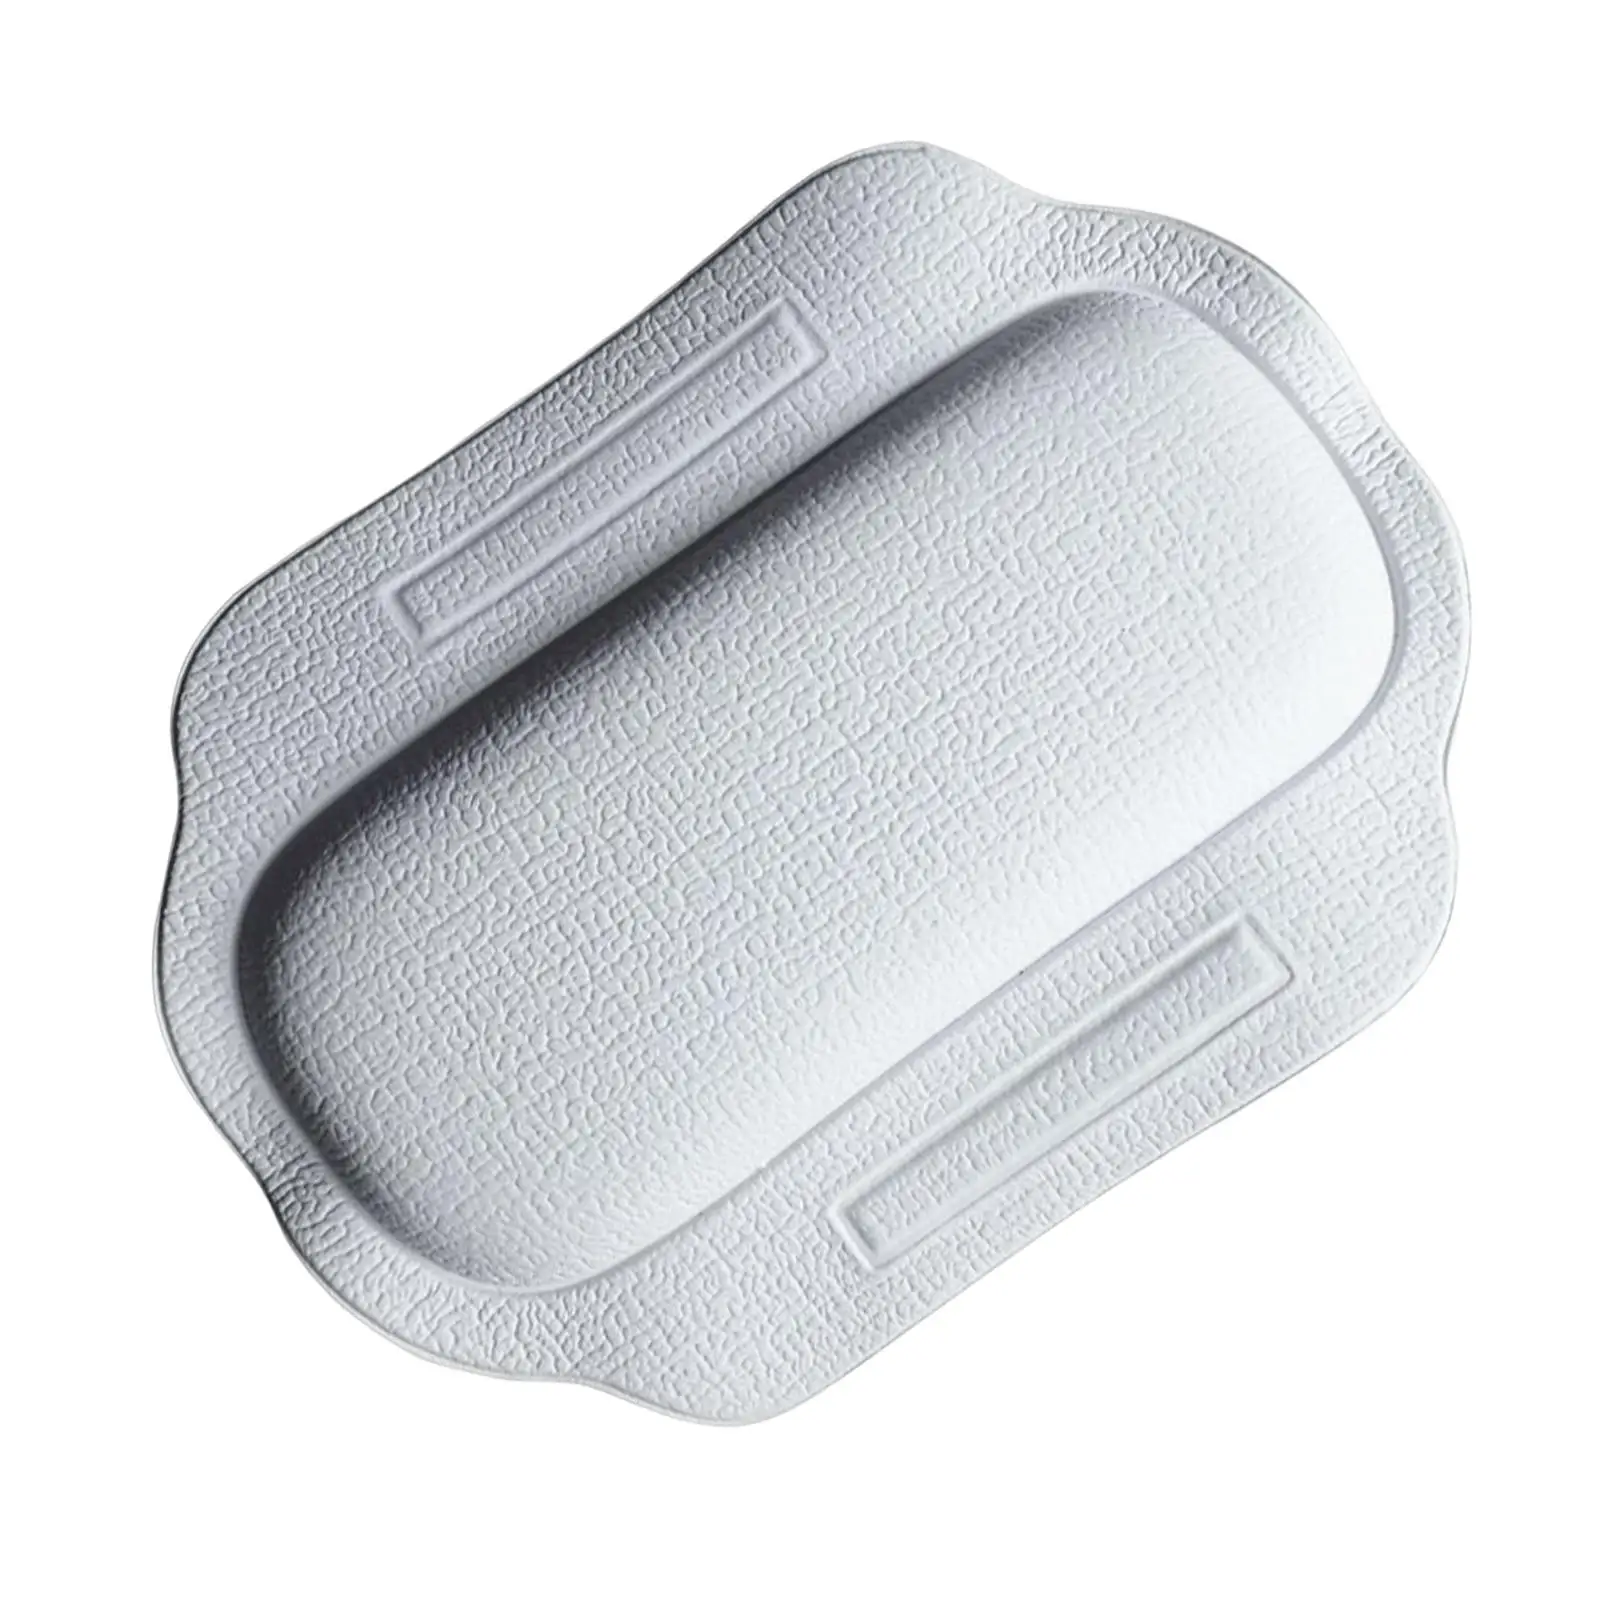 Bath Pillow with Suction Cups Quick Drying Relax Comfy Accessories Non Slip Home Waterproof Cushion SPA Bathtub Head Rest